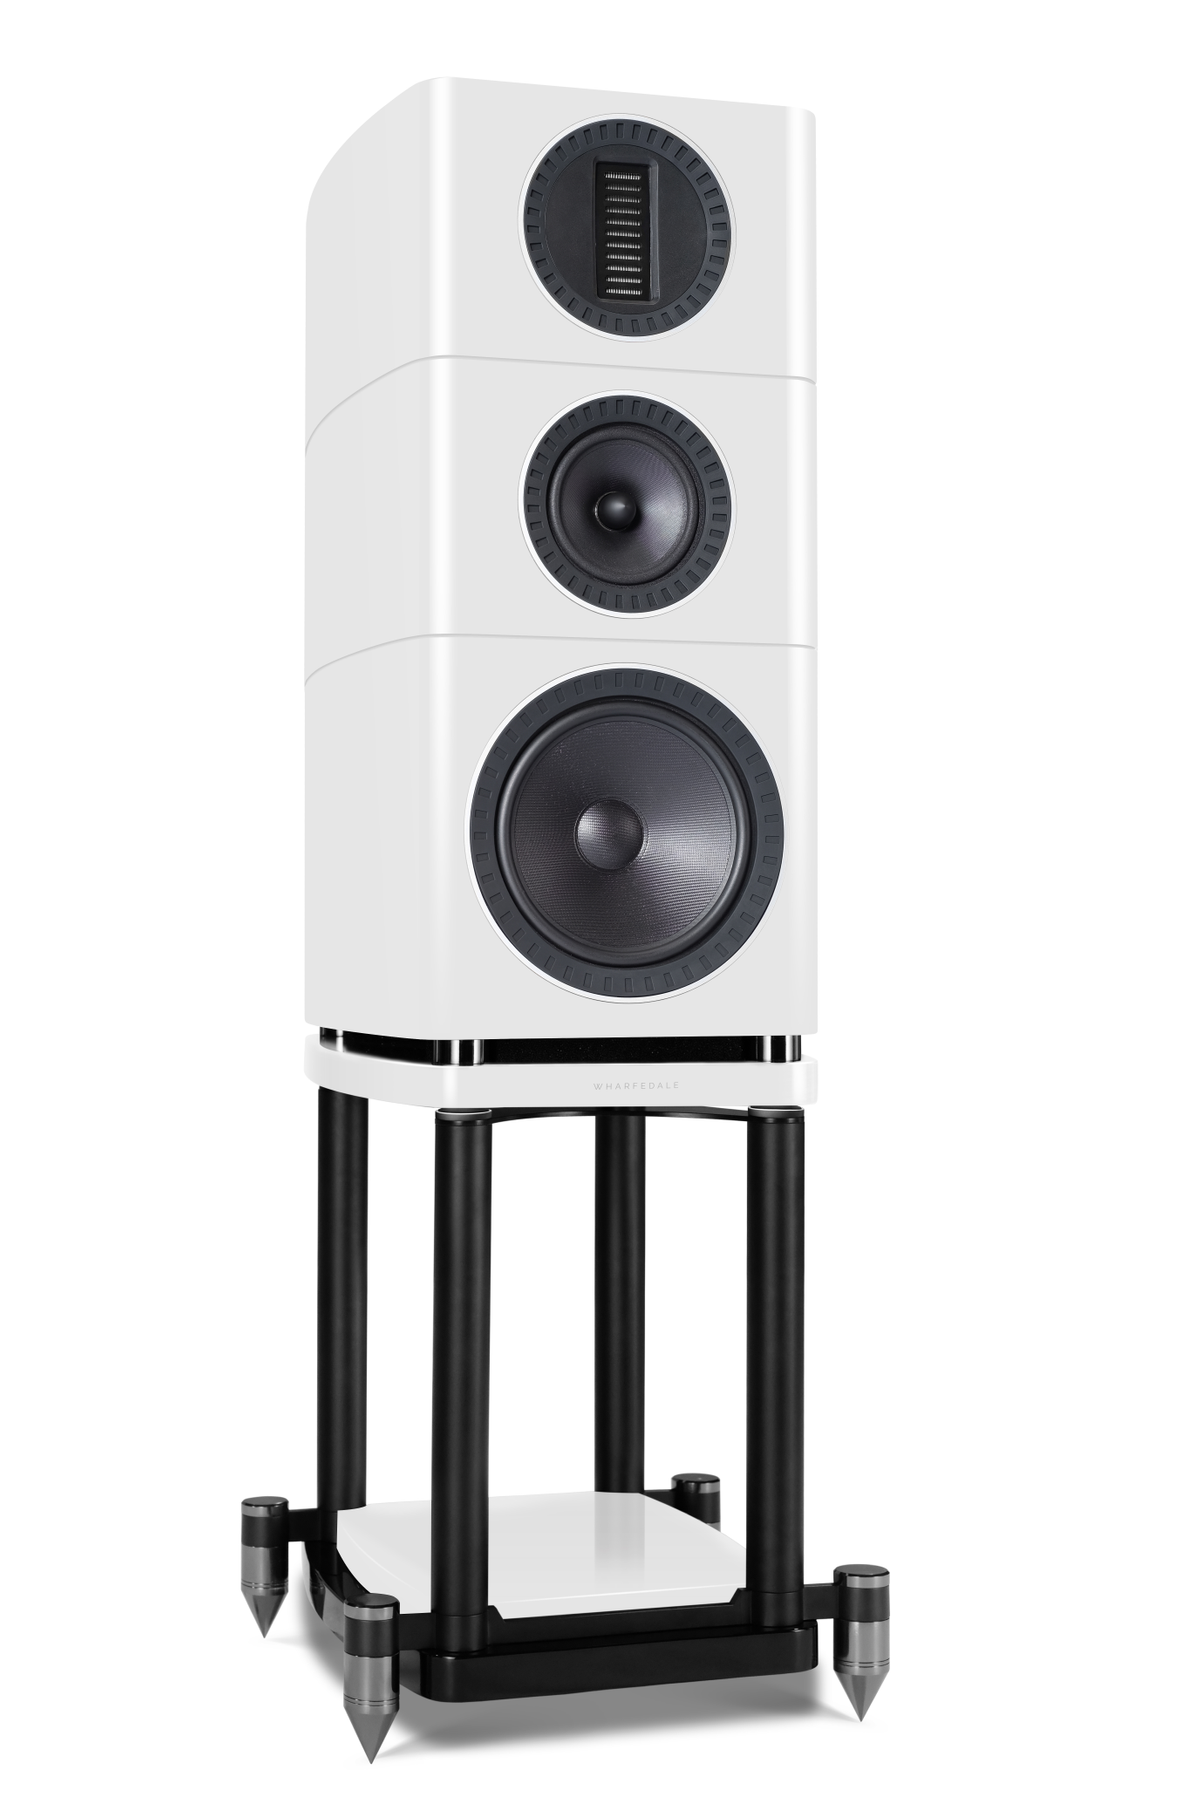 This elegant speaker stand is custom-designed to place a Wharfedale Elysian 2 speaker at the ideal listening height. Outrigger feet with carpet spikes provide added stability to help your speaker sound its best.